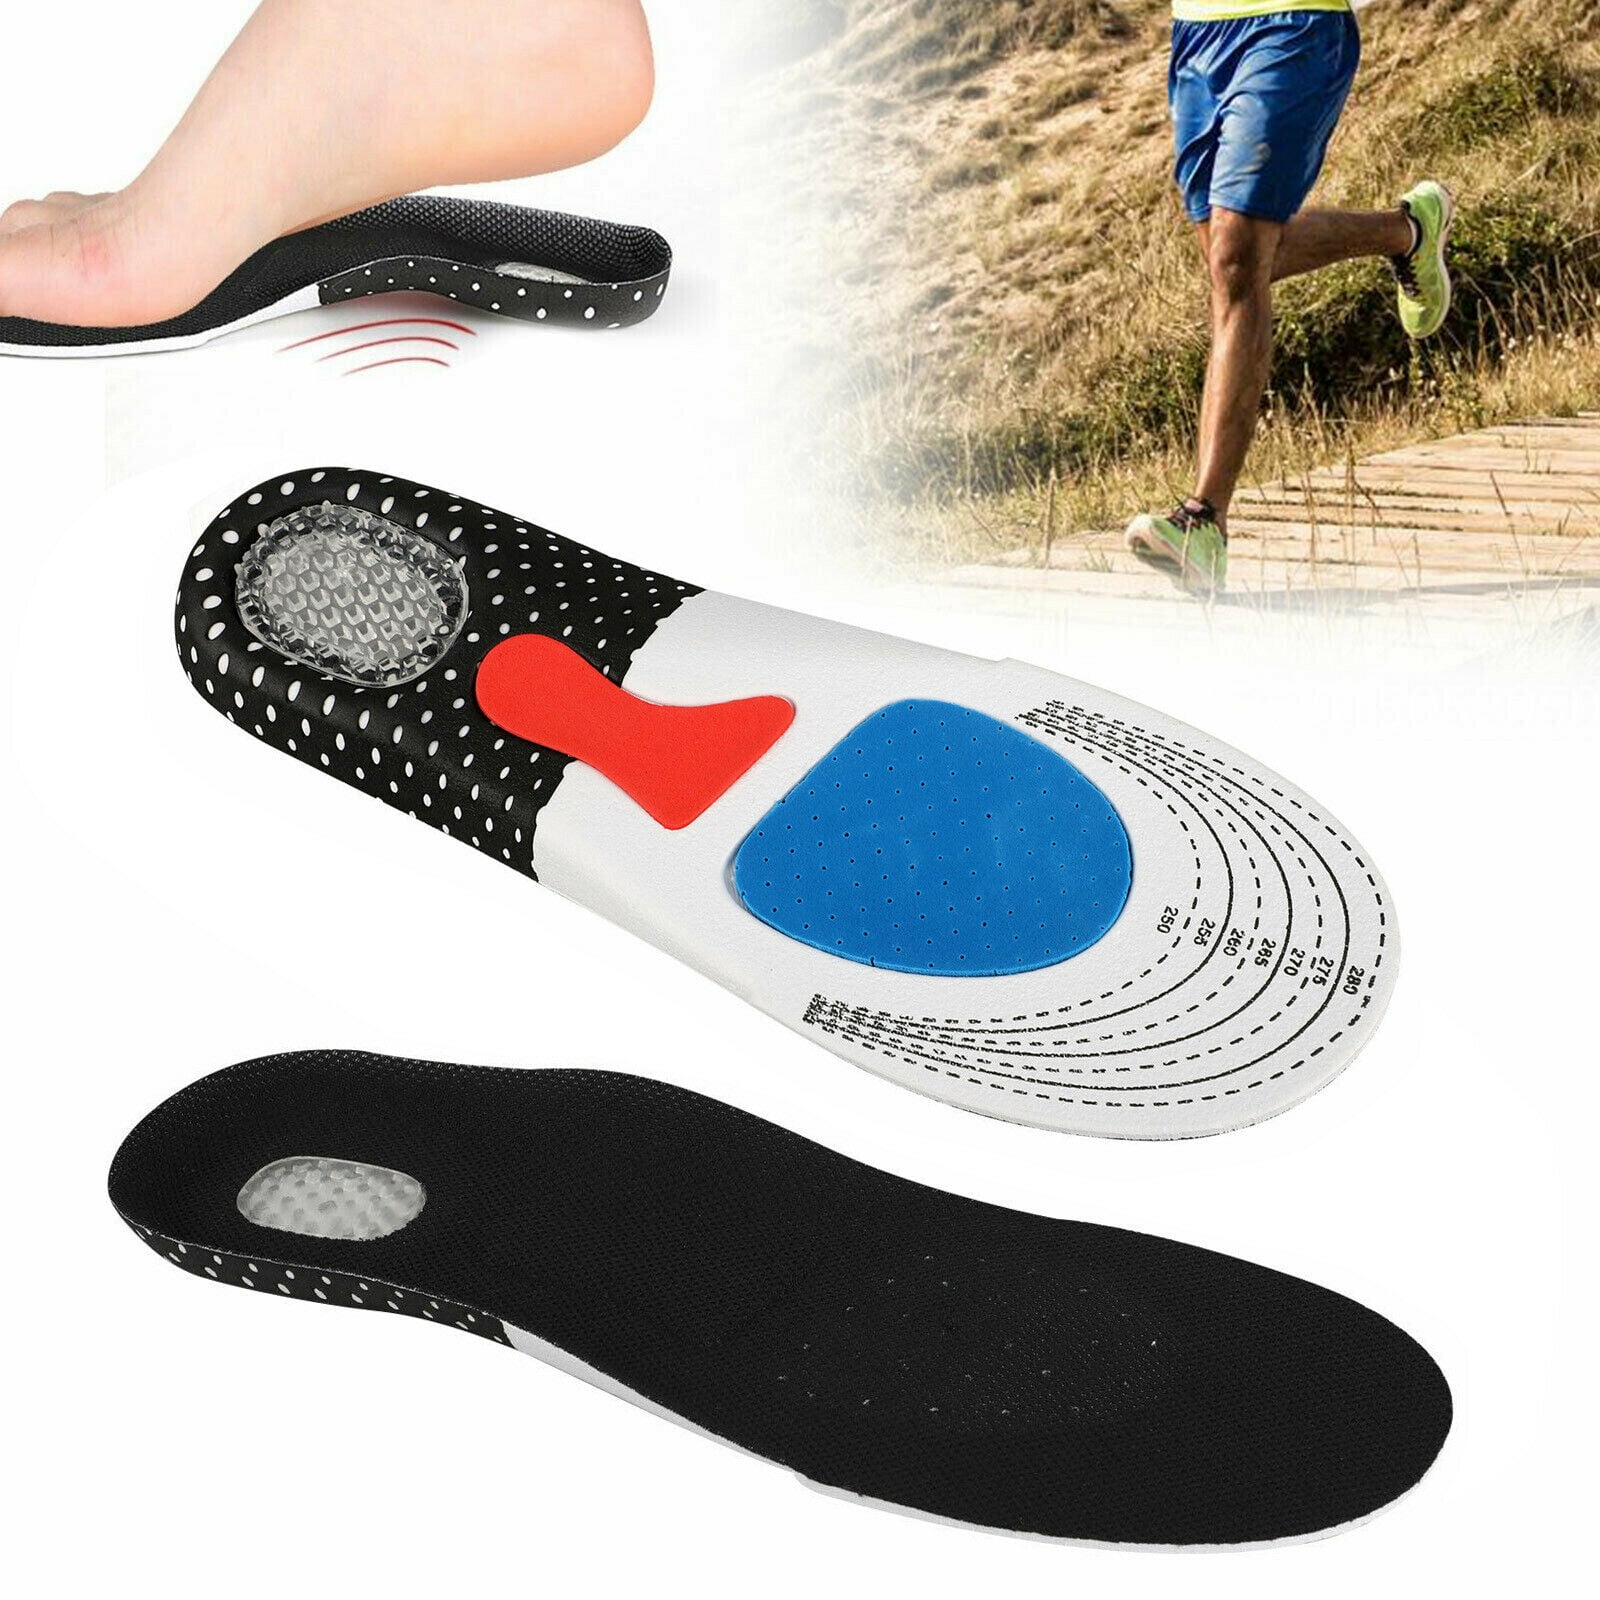 Orthotic Arch Support Shoe Pad Sport Running Gel Insoles Insert Cushion US g